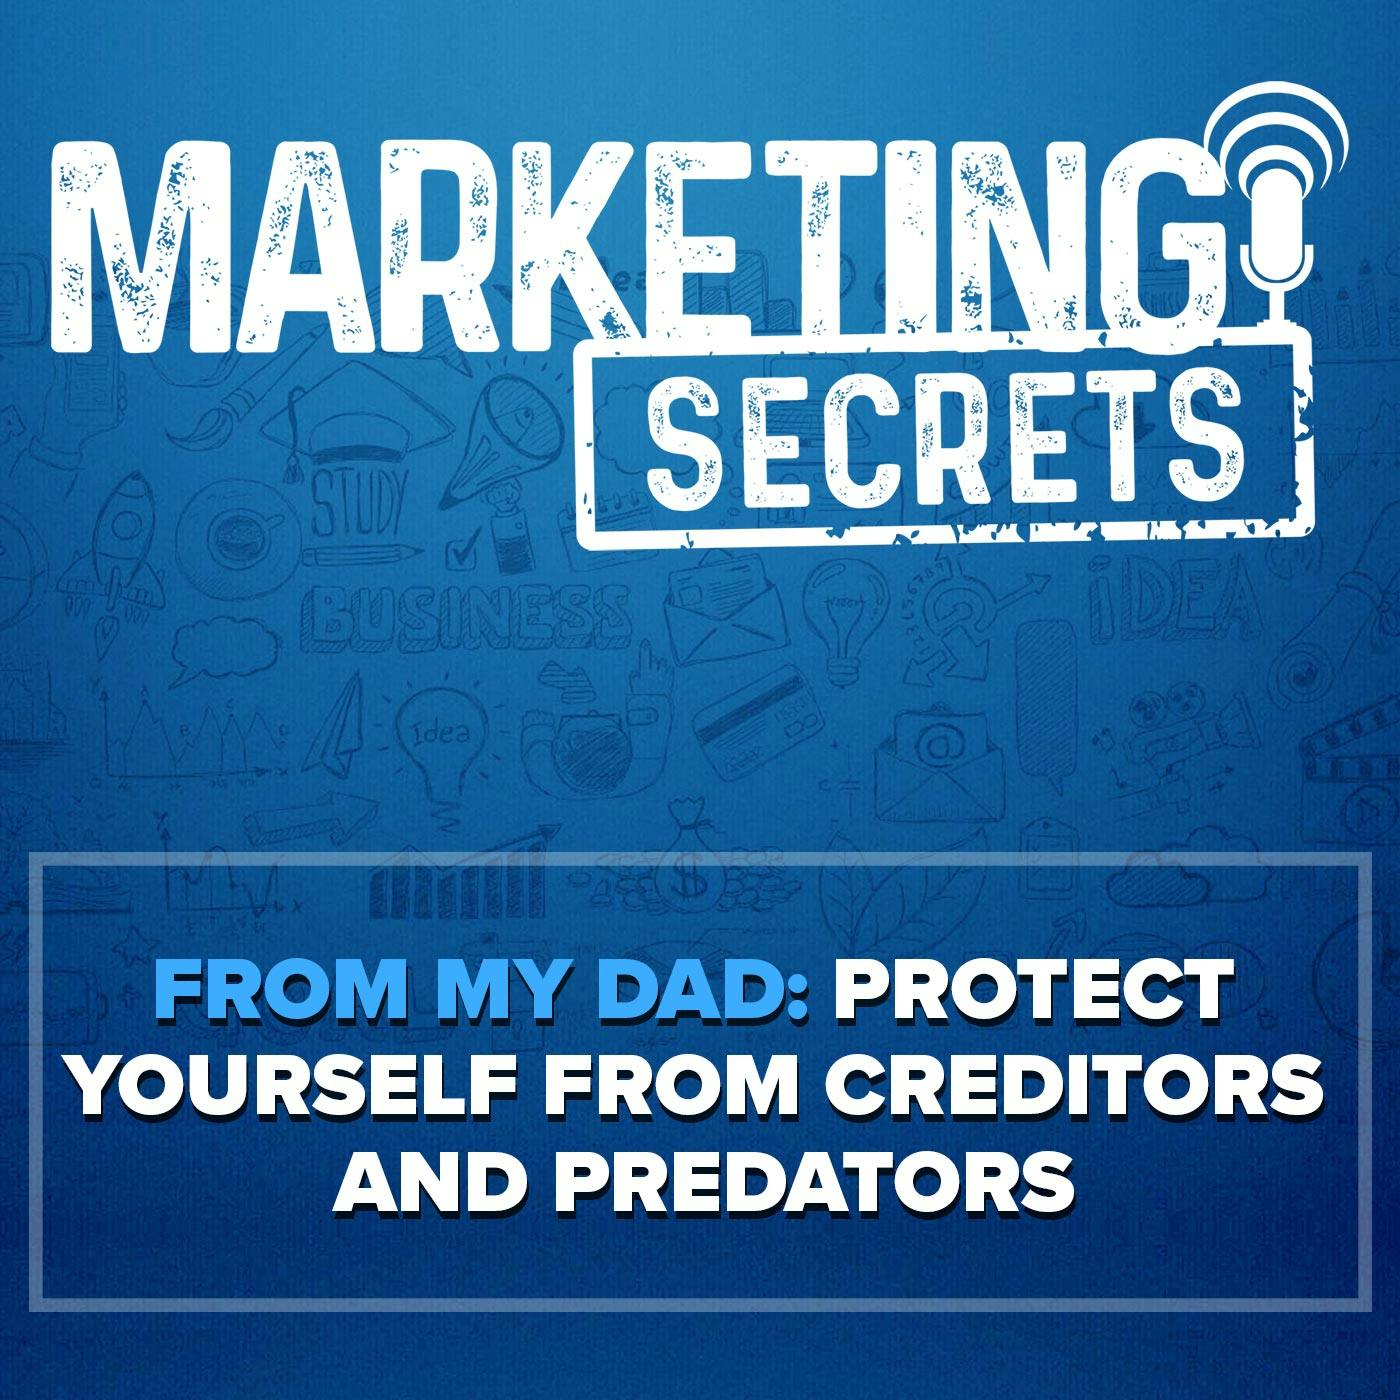 From my Dad: Protect Yourself from Creditors and Predators